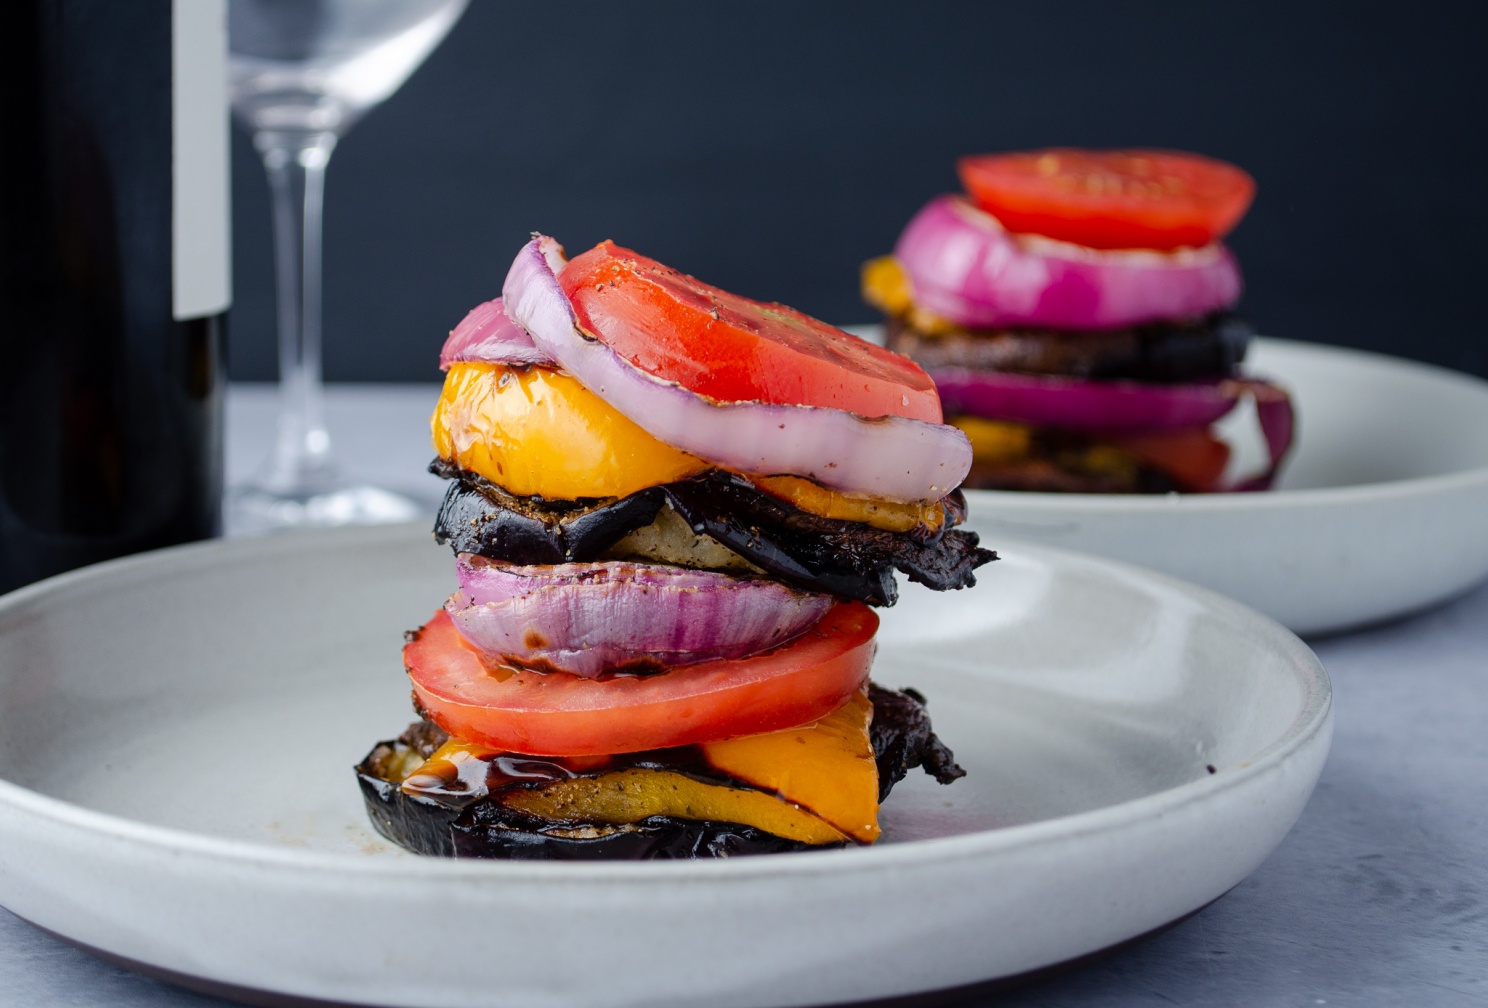 Grilled Portobello Mushroom with red wine mushroom sauce and served in a stake with grilled peppers, tomatoes, and onions